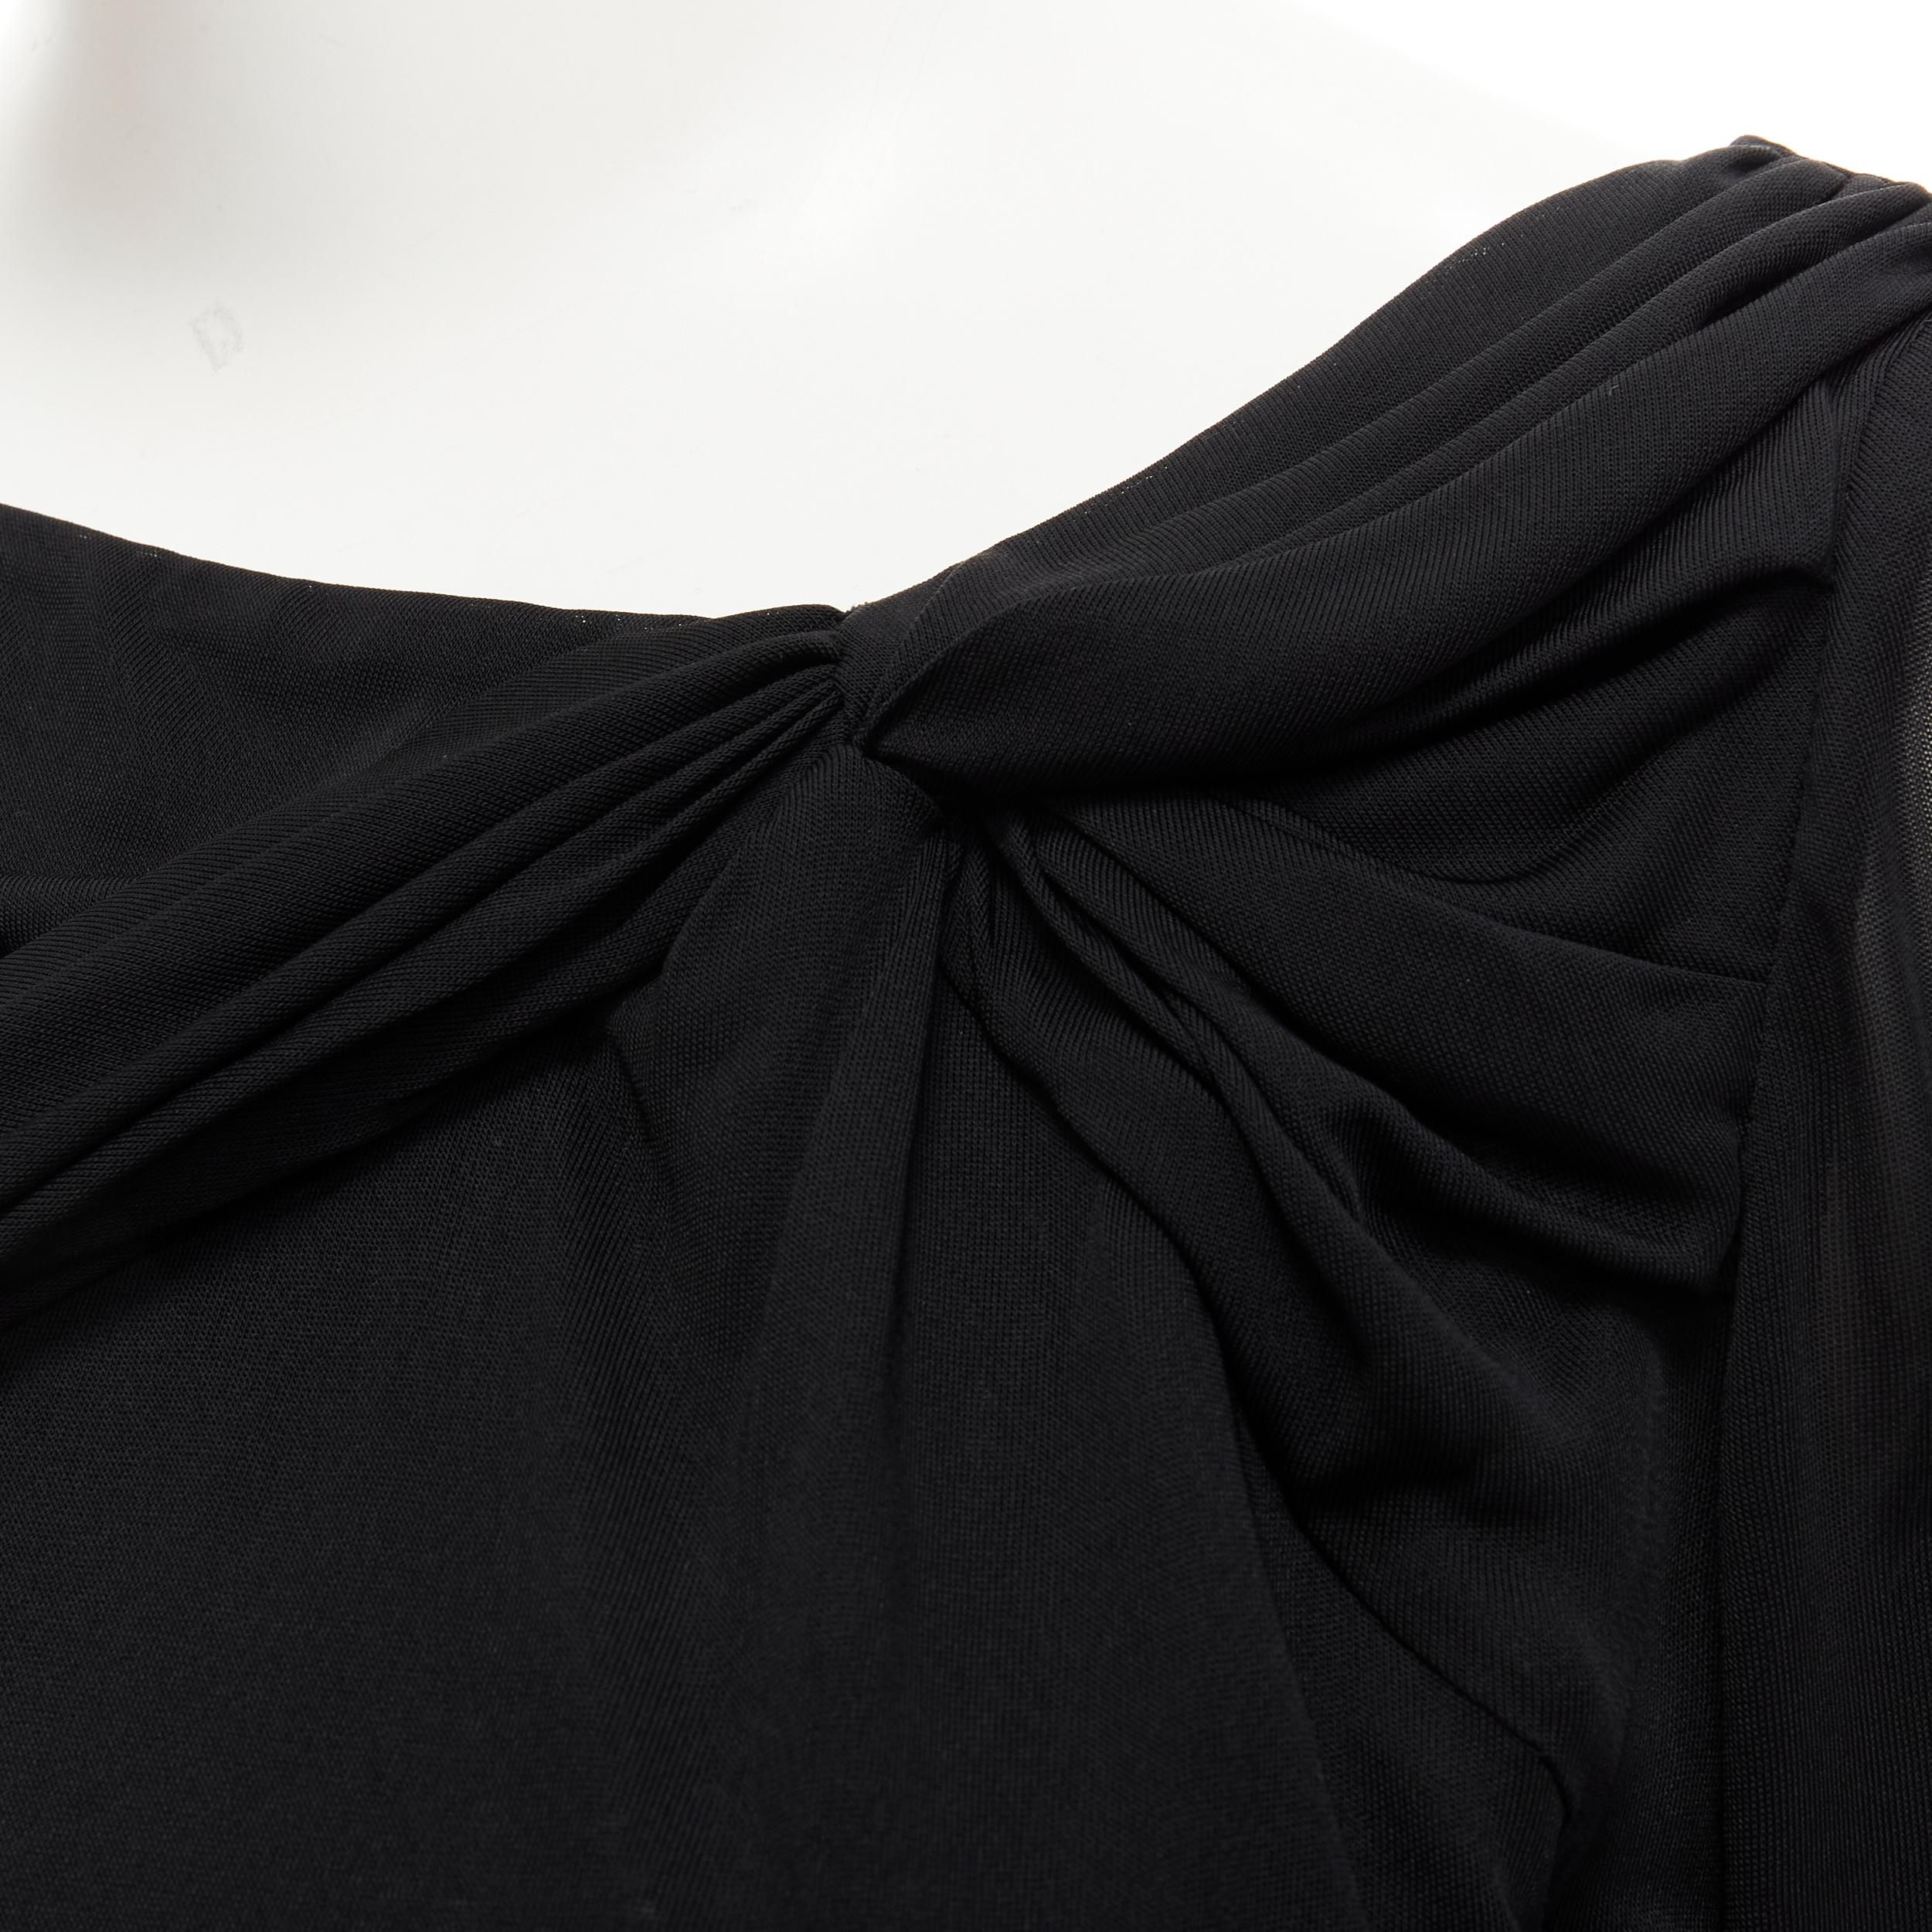 VERSACE black viscose draped wide neckline sheer sleeve top IT38 
Reference: LNKO/A01858 
Brand: Versace 
Material: Viscose 
Color: Black 
Pattern: Solid 
Made in: Italy 

CONDITION: 
Condition: Excellent, this item was pre-owned and is in excellent